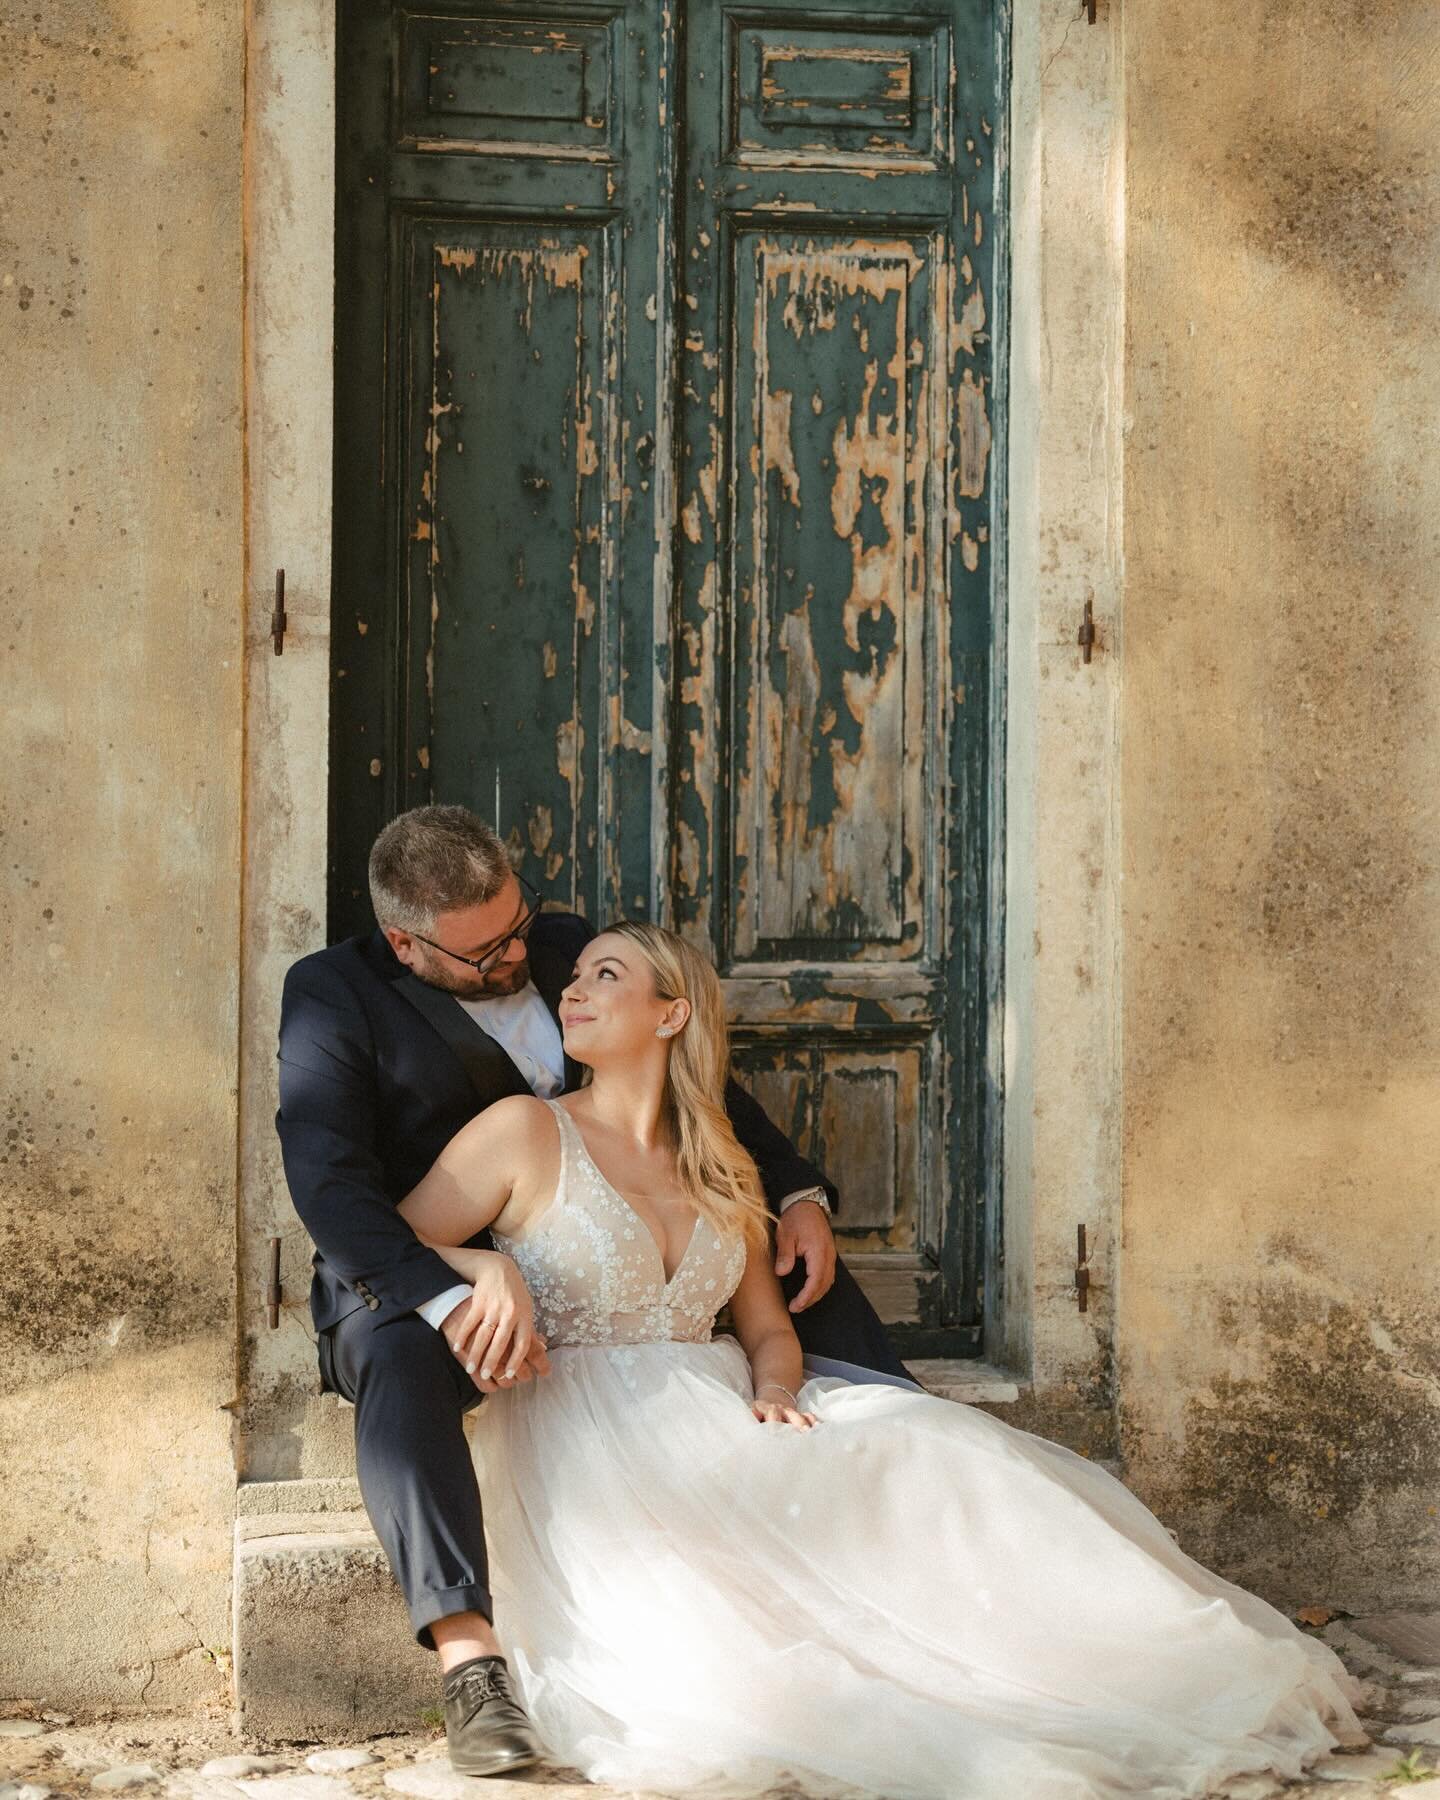 &ldquo;The best thing to hold onto in life is each other.&rdquo;
Our beautiful bride Louiza in her #mantogrammenoubridal wedding dress 🤍

#corfu #danilliavillage #weddingdress #weddingatcorfu #corfuweddingphotographer #corfuweddingphotography #weddi